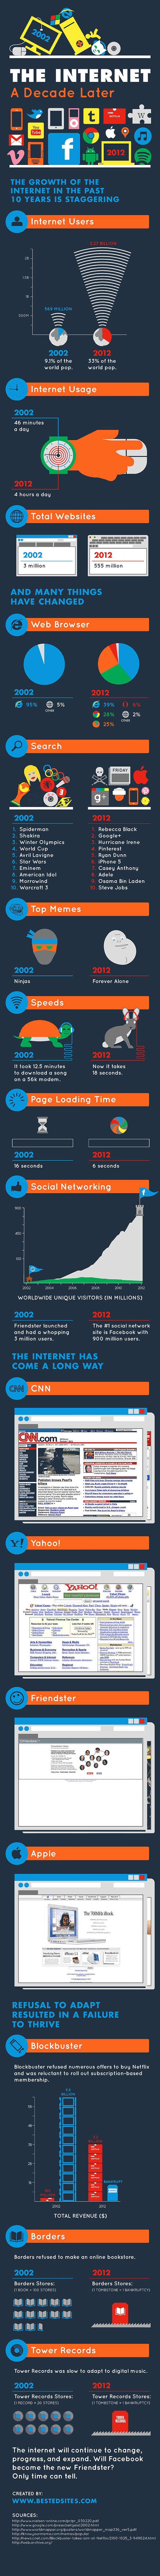 Internet-Habits-Then-And-Now